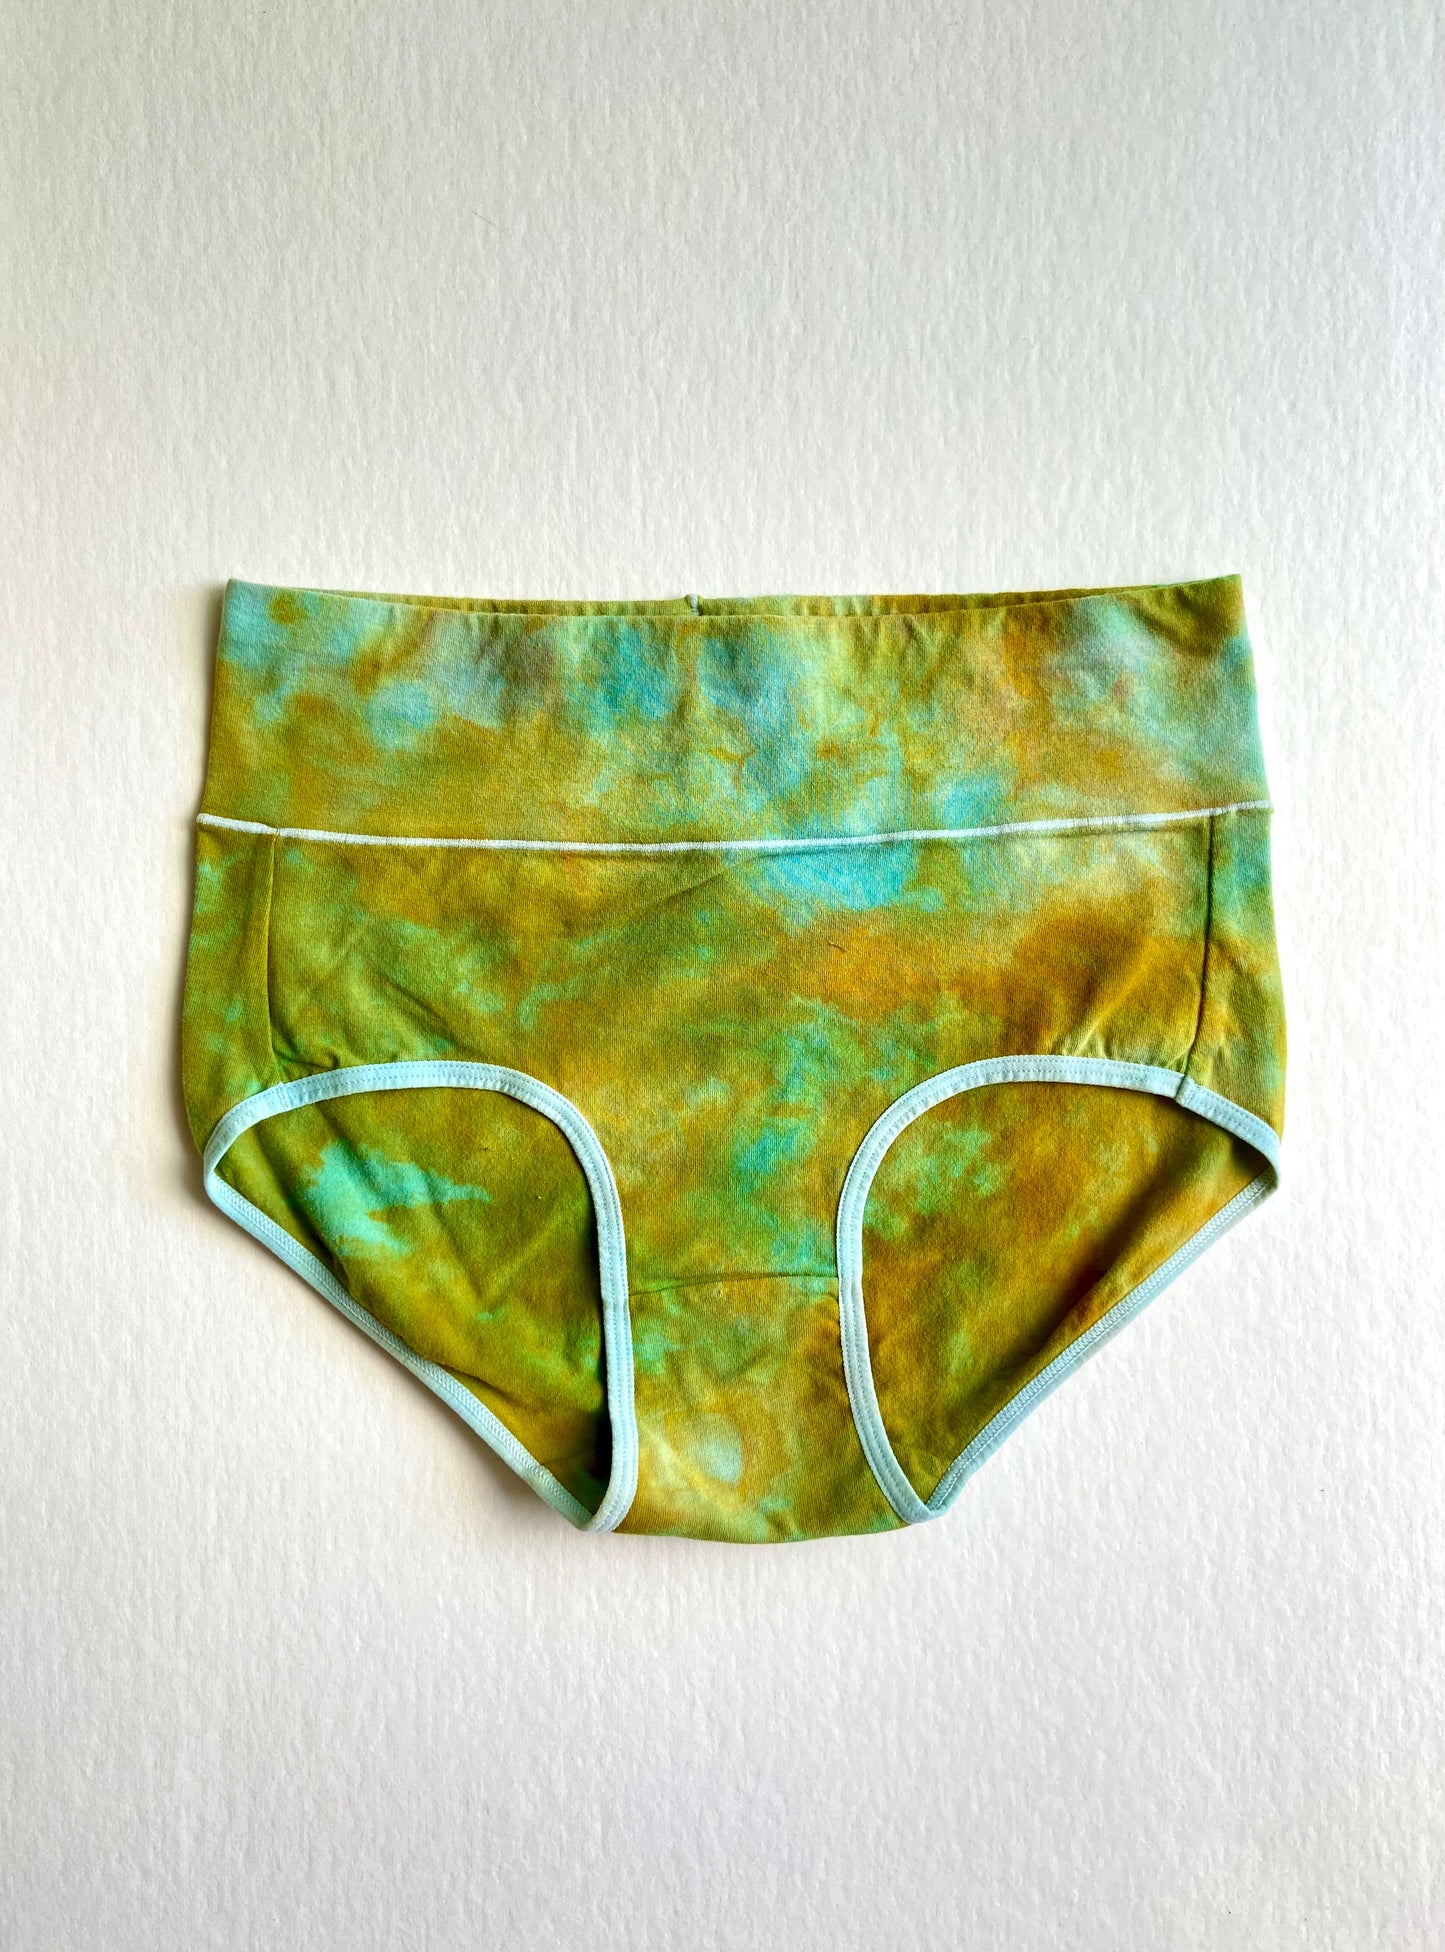 Pro Choice Panties in ALL the colors